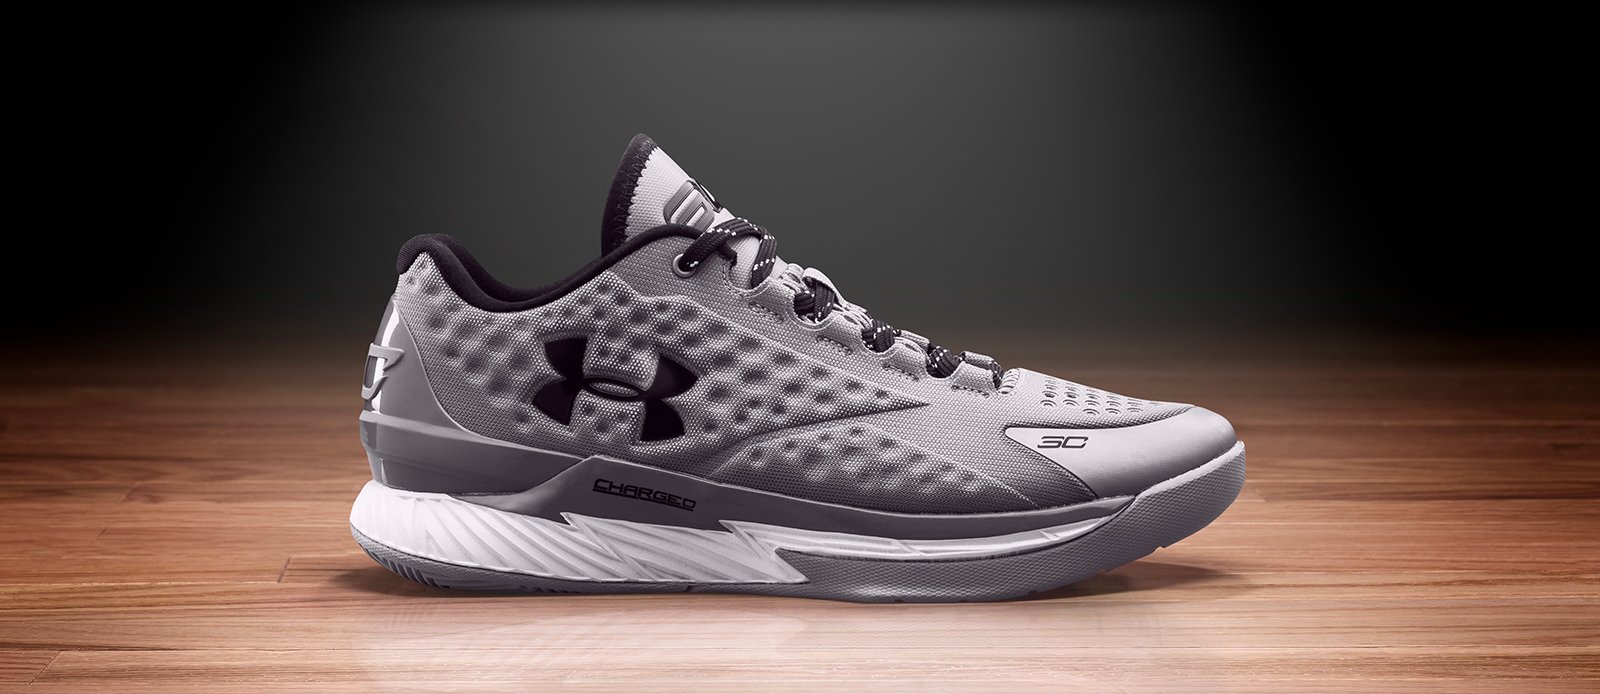 curry 1 lows